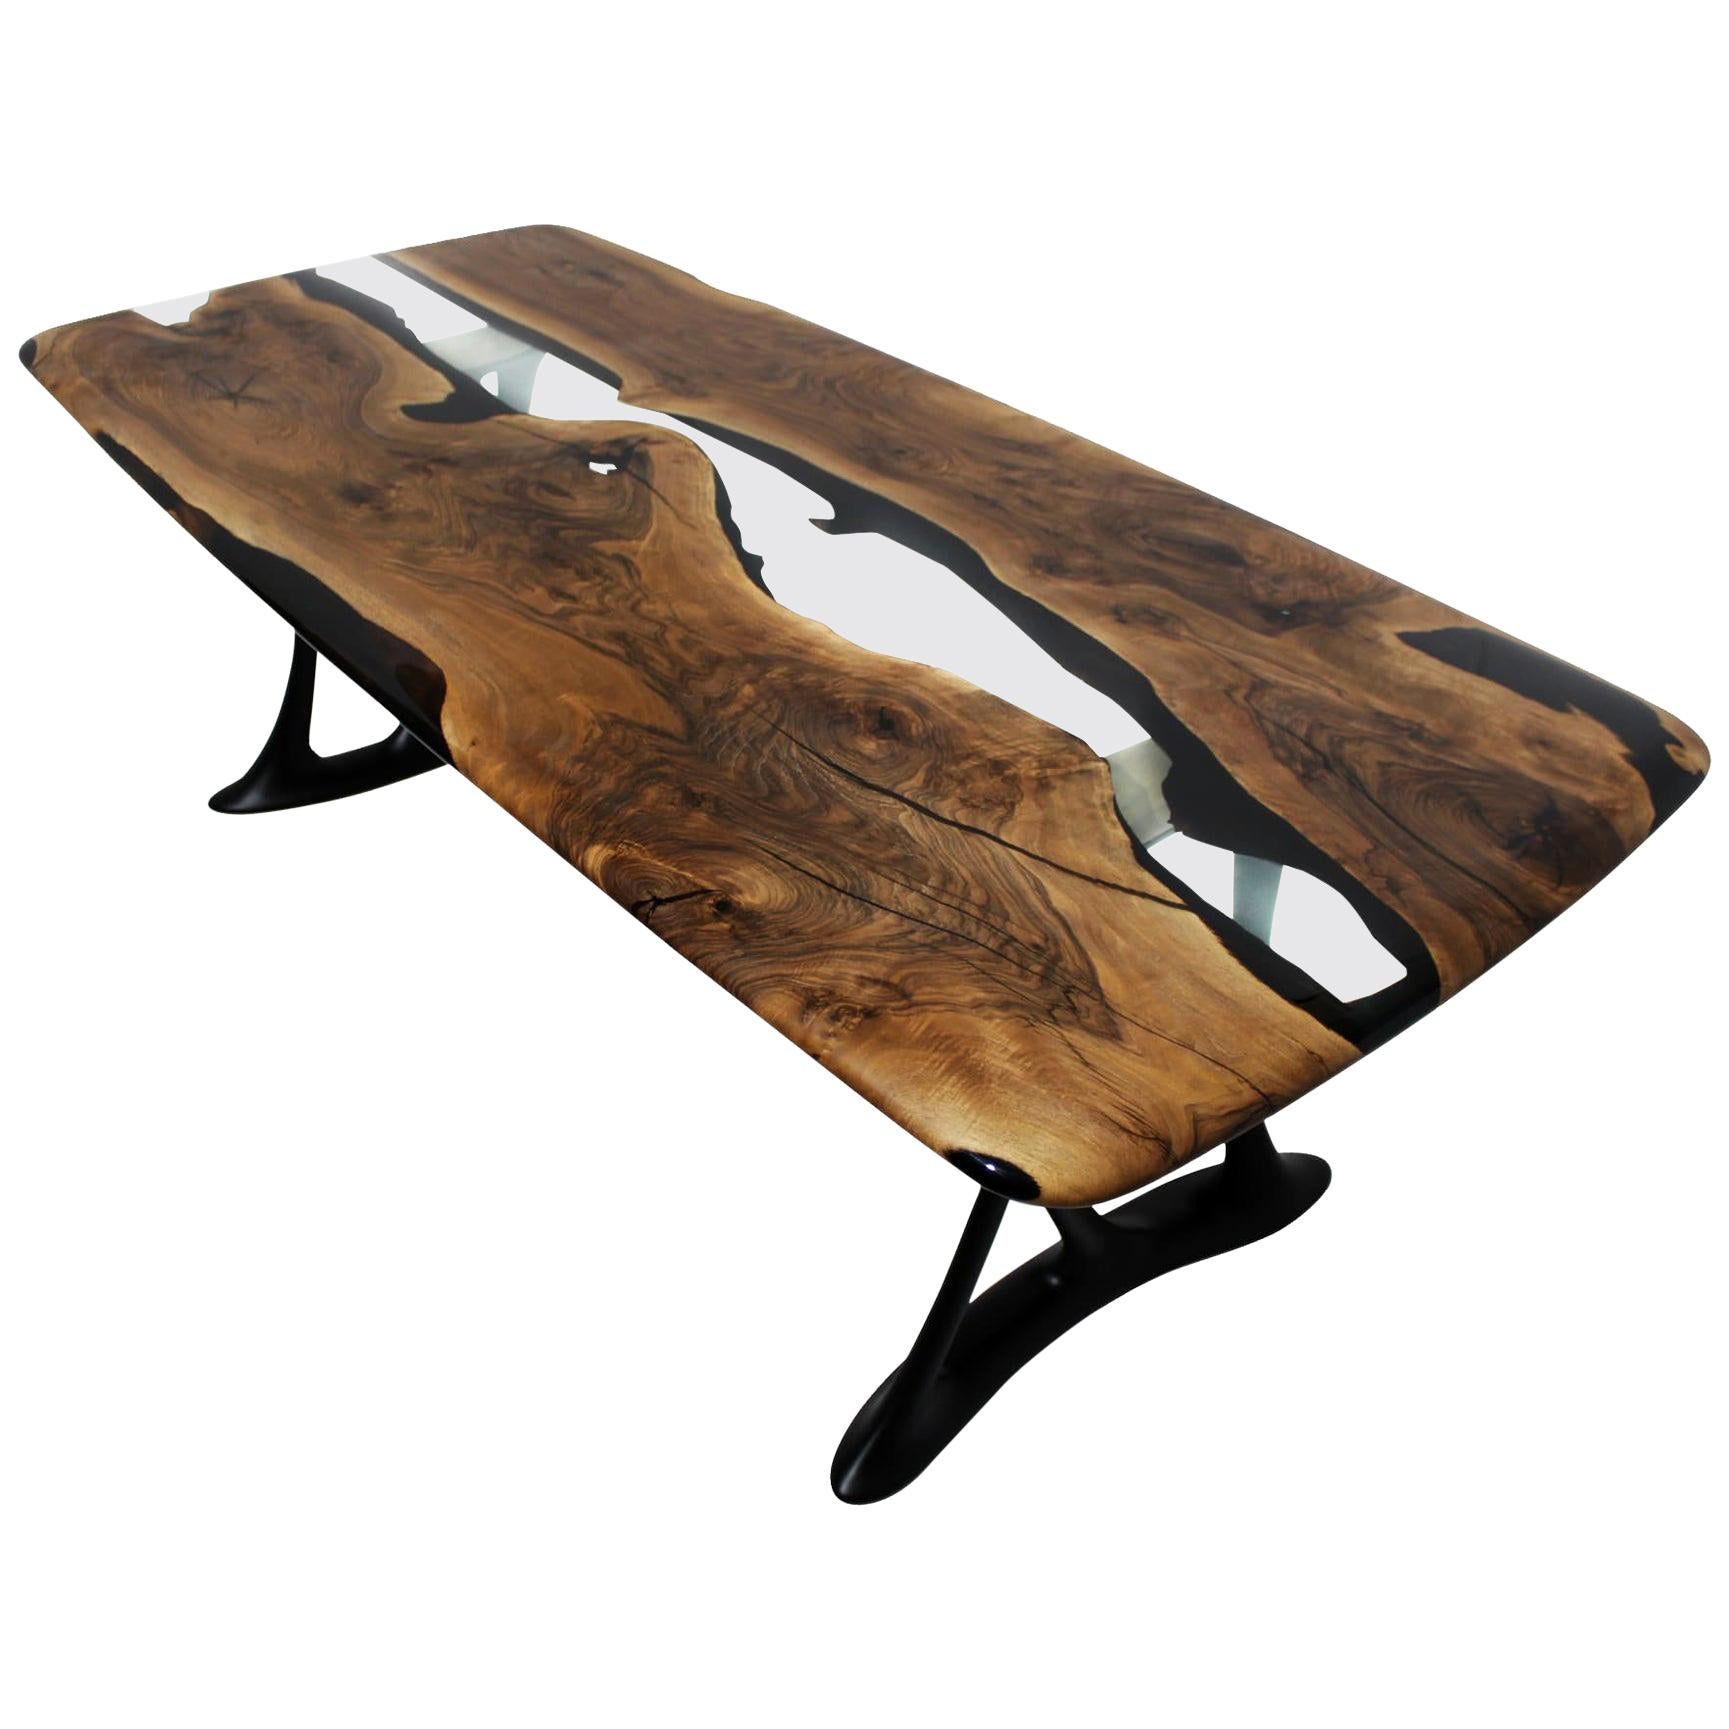 Urbane 220 Epoxy Resin Dining Tables with Sand Casted Aluminum Base For Sale